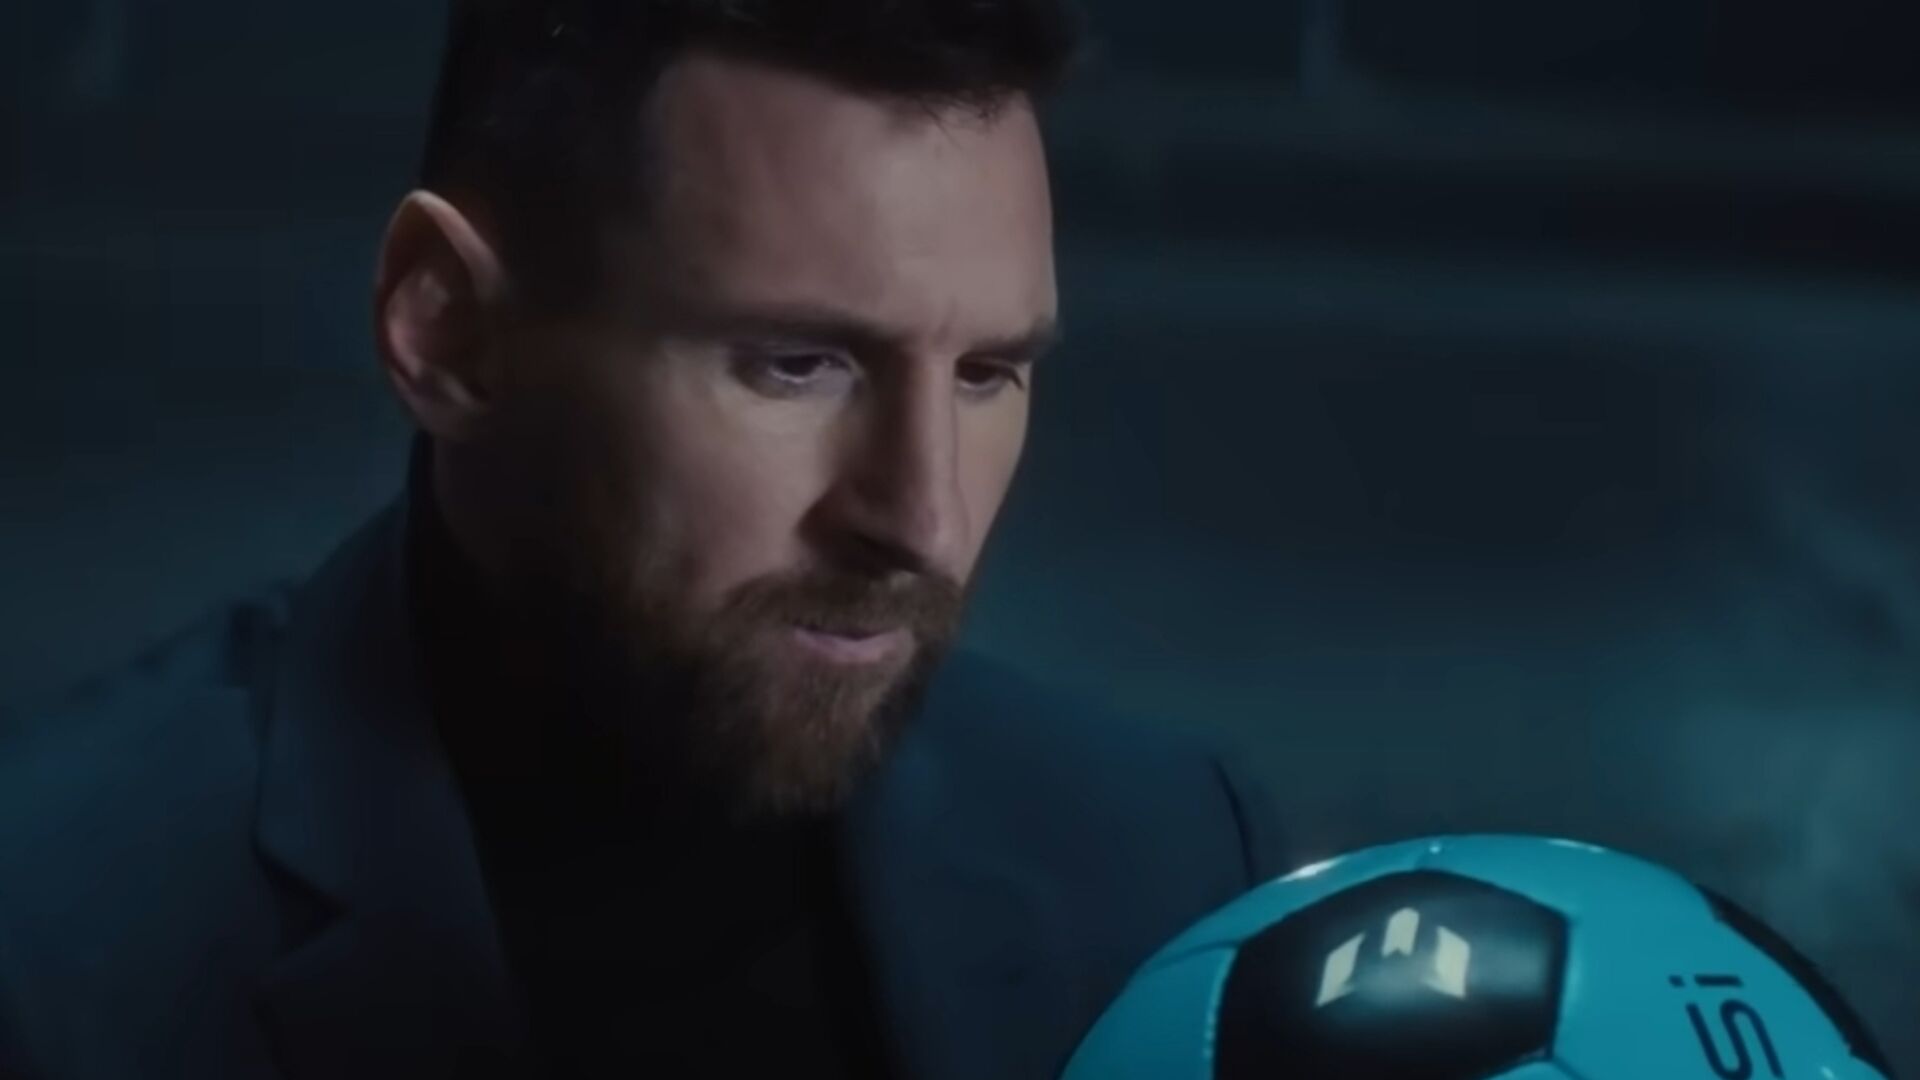 Lionel Messi: the film #MakeItCount 2024 symbolizes the fundamental values ​​shared by the crypto exchange Bitget and the Argentine footballer